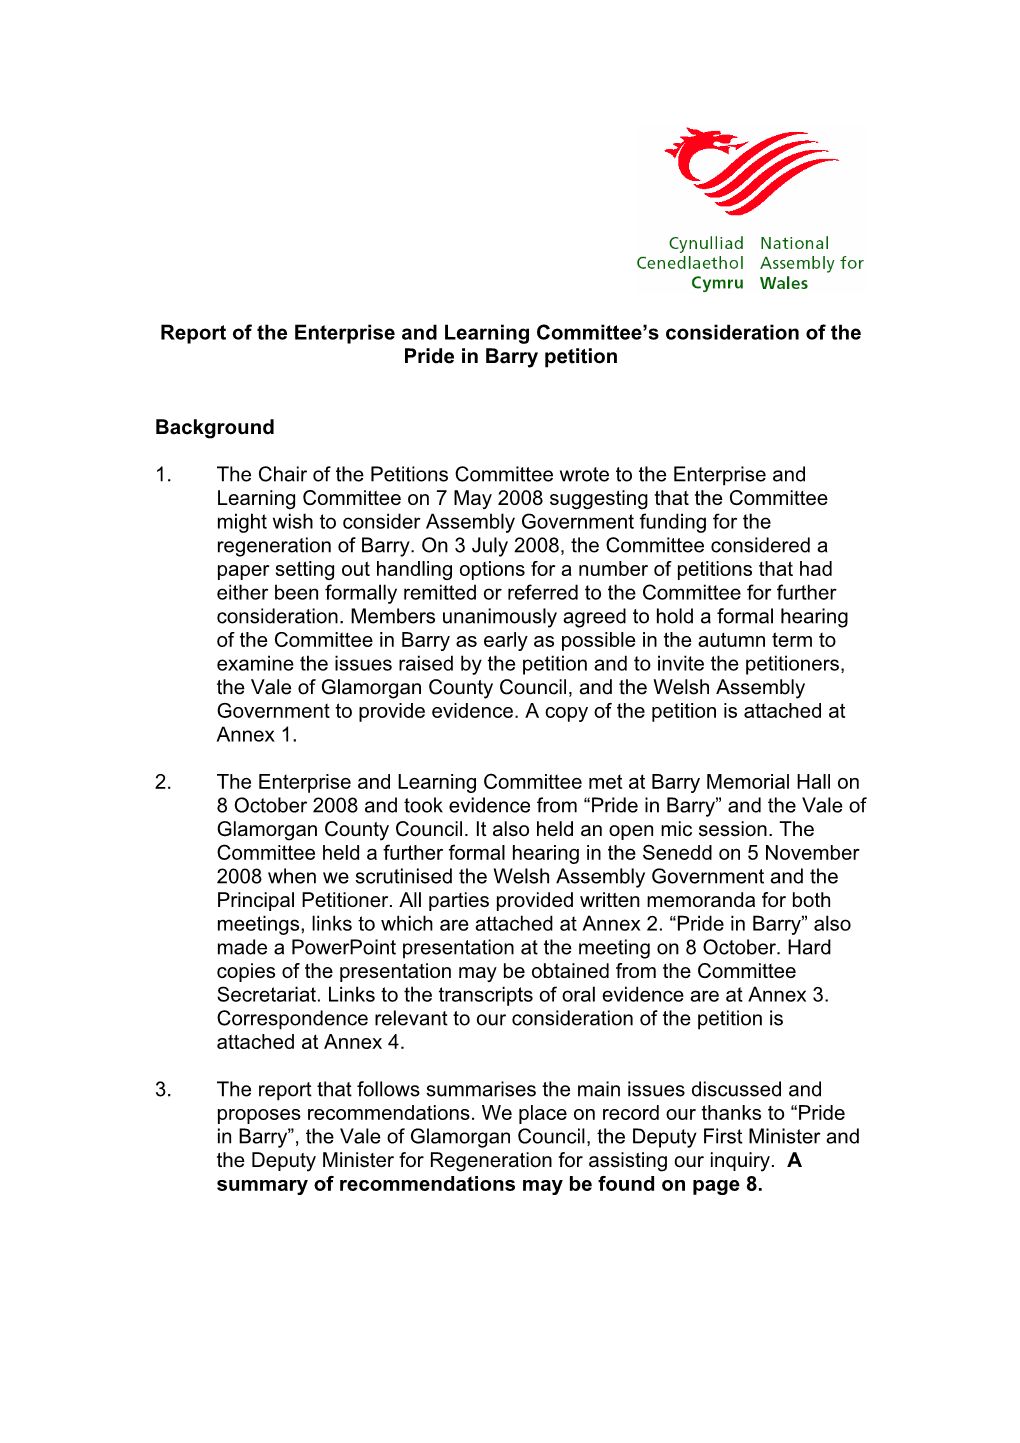 Report of the Enterprise and Learning Committee's Consideration of The